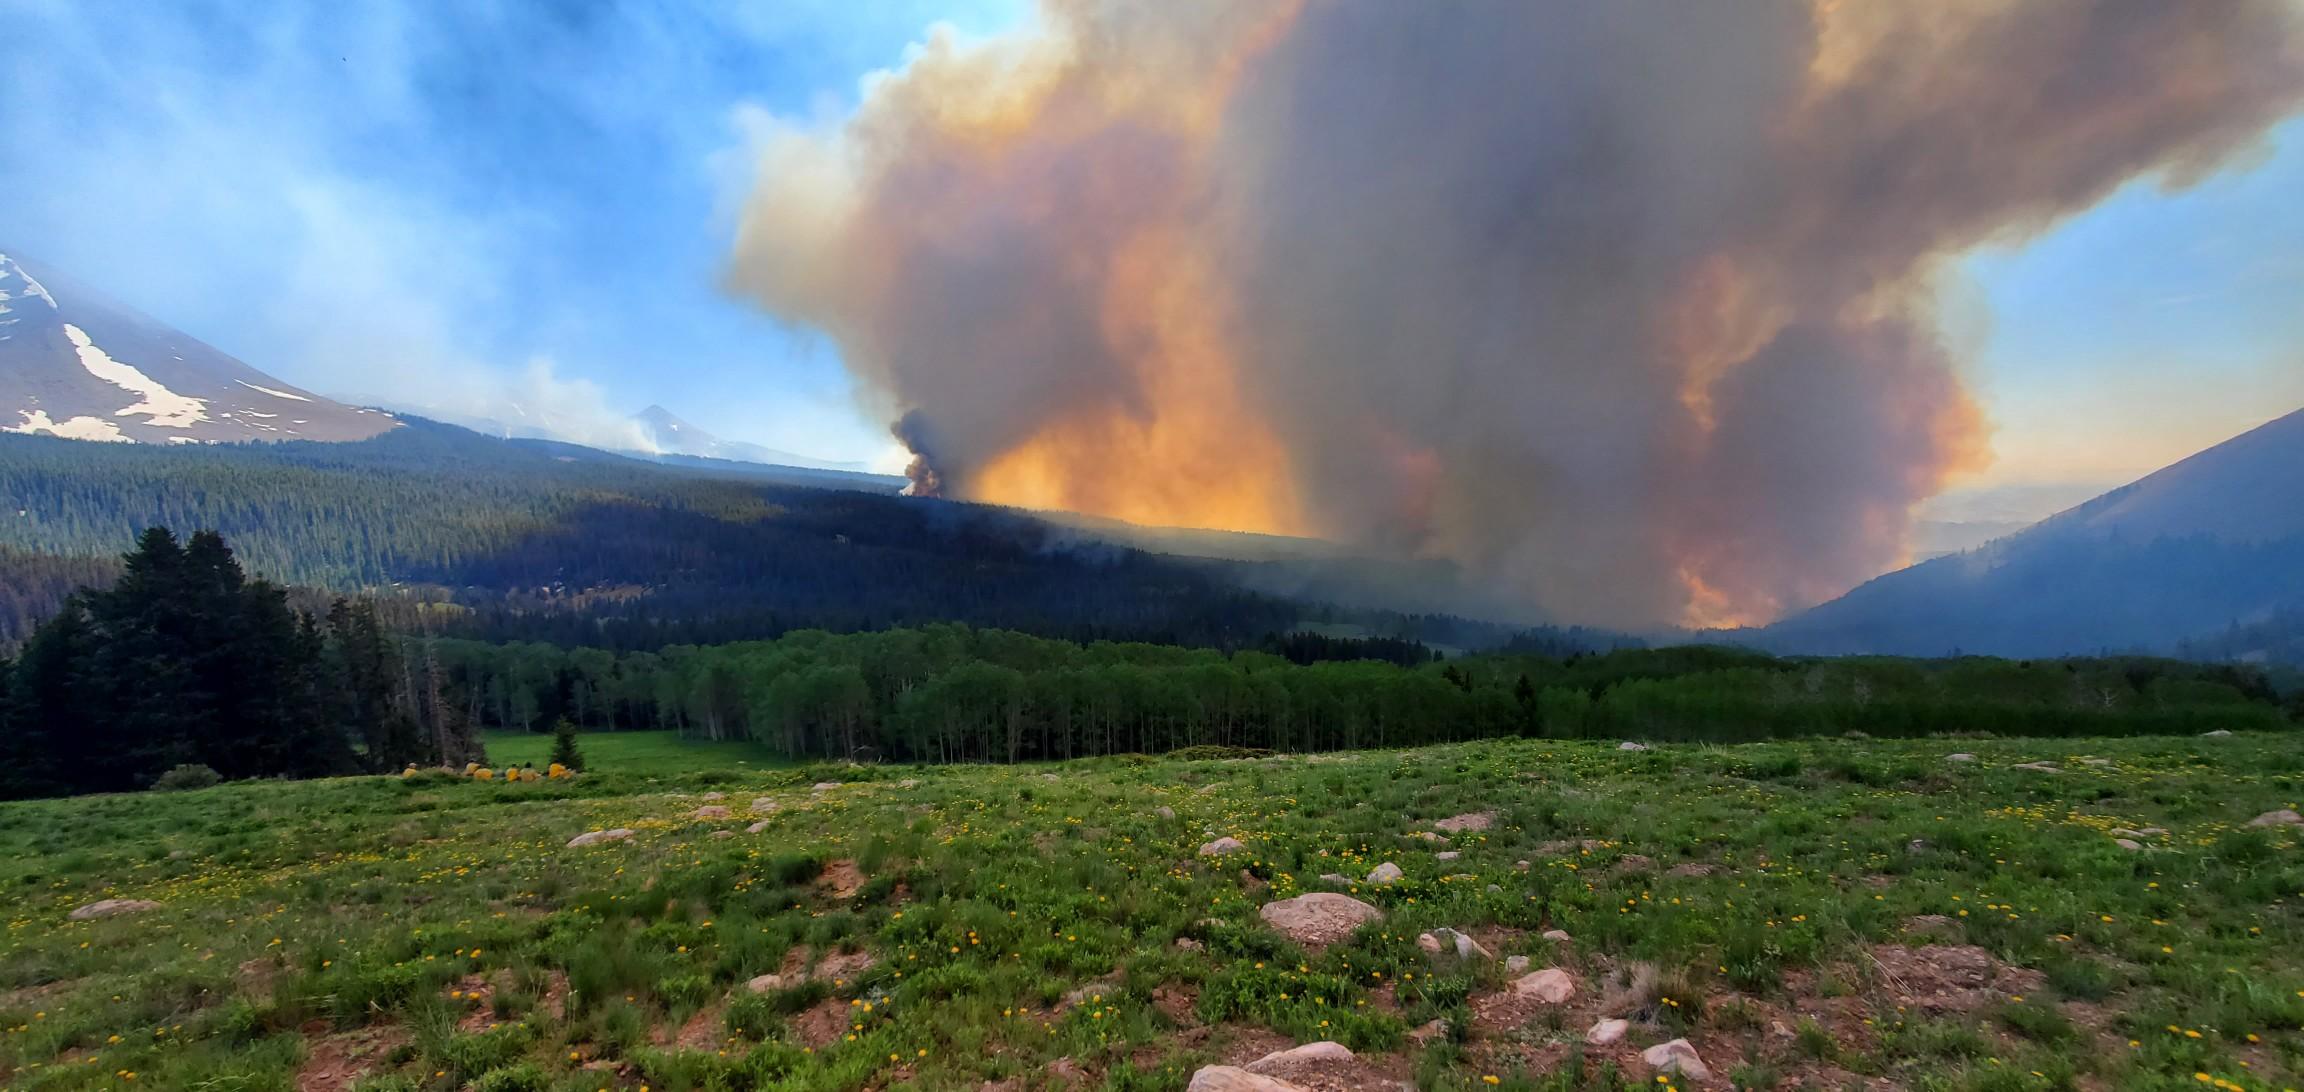 Want to Bike Out West This Summer? Leave the Fires at Home.